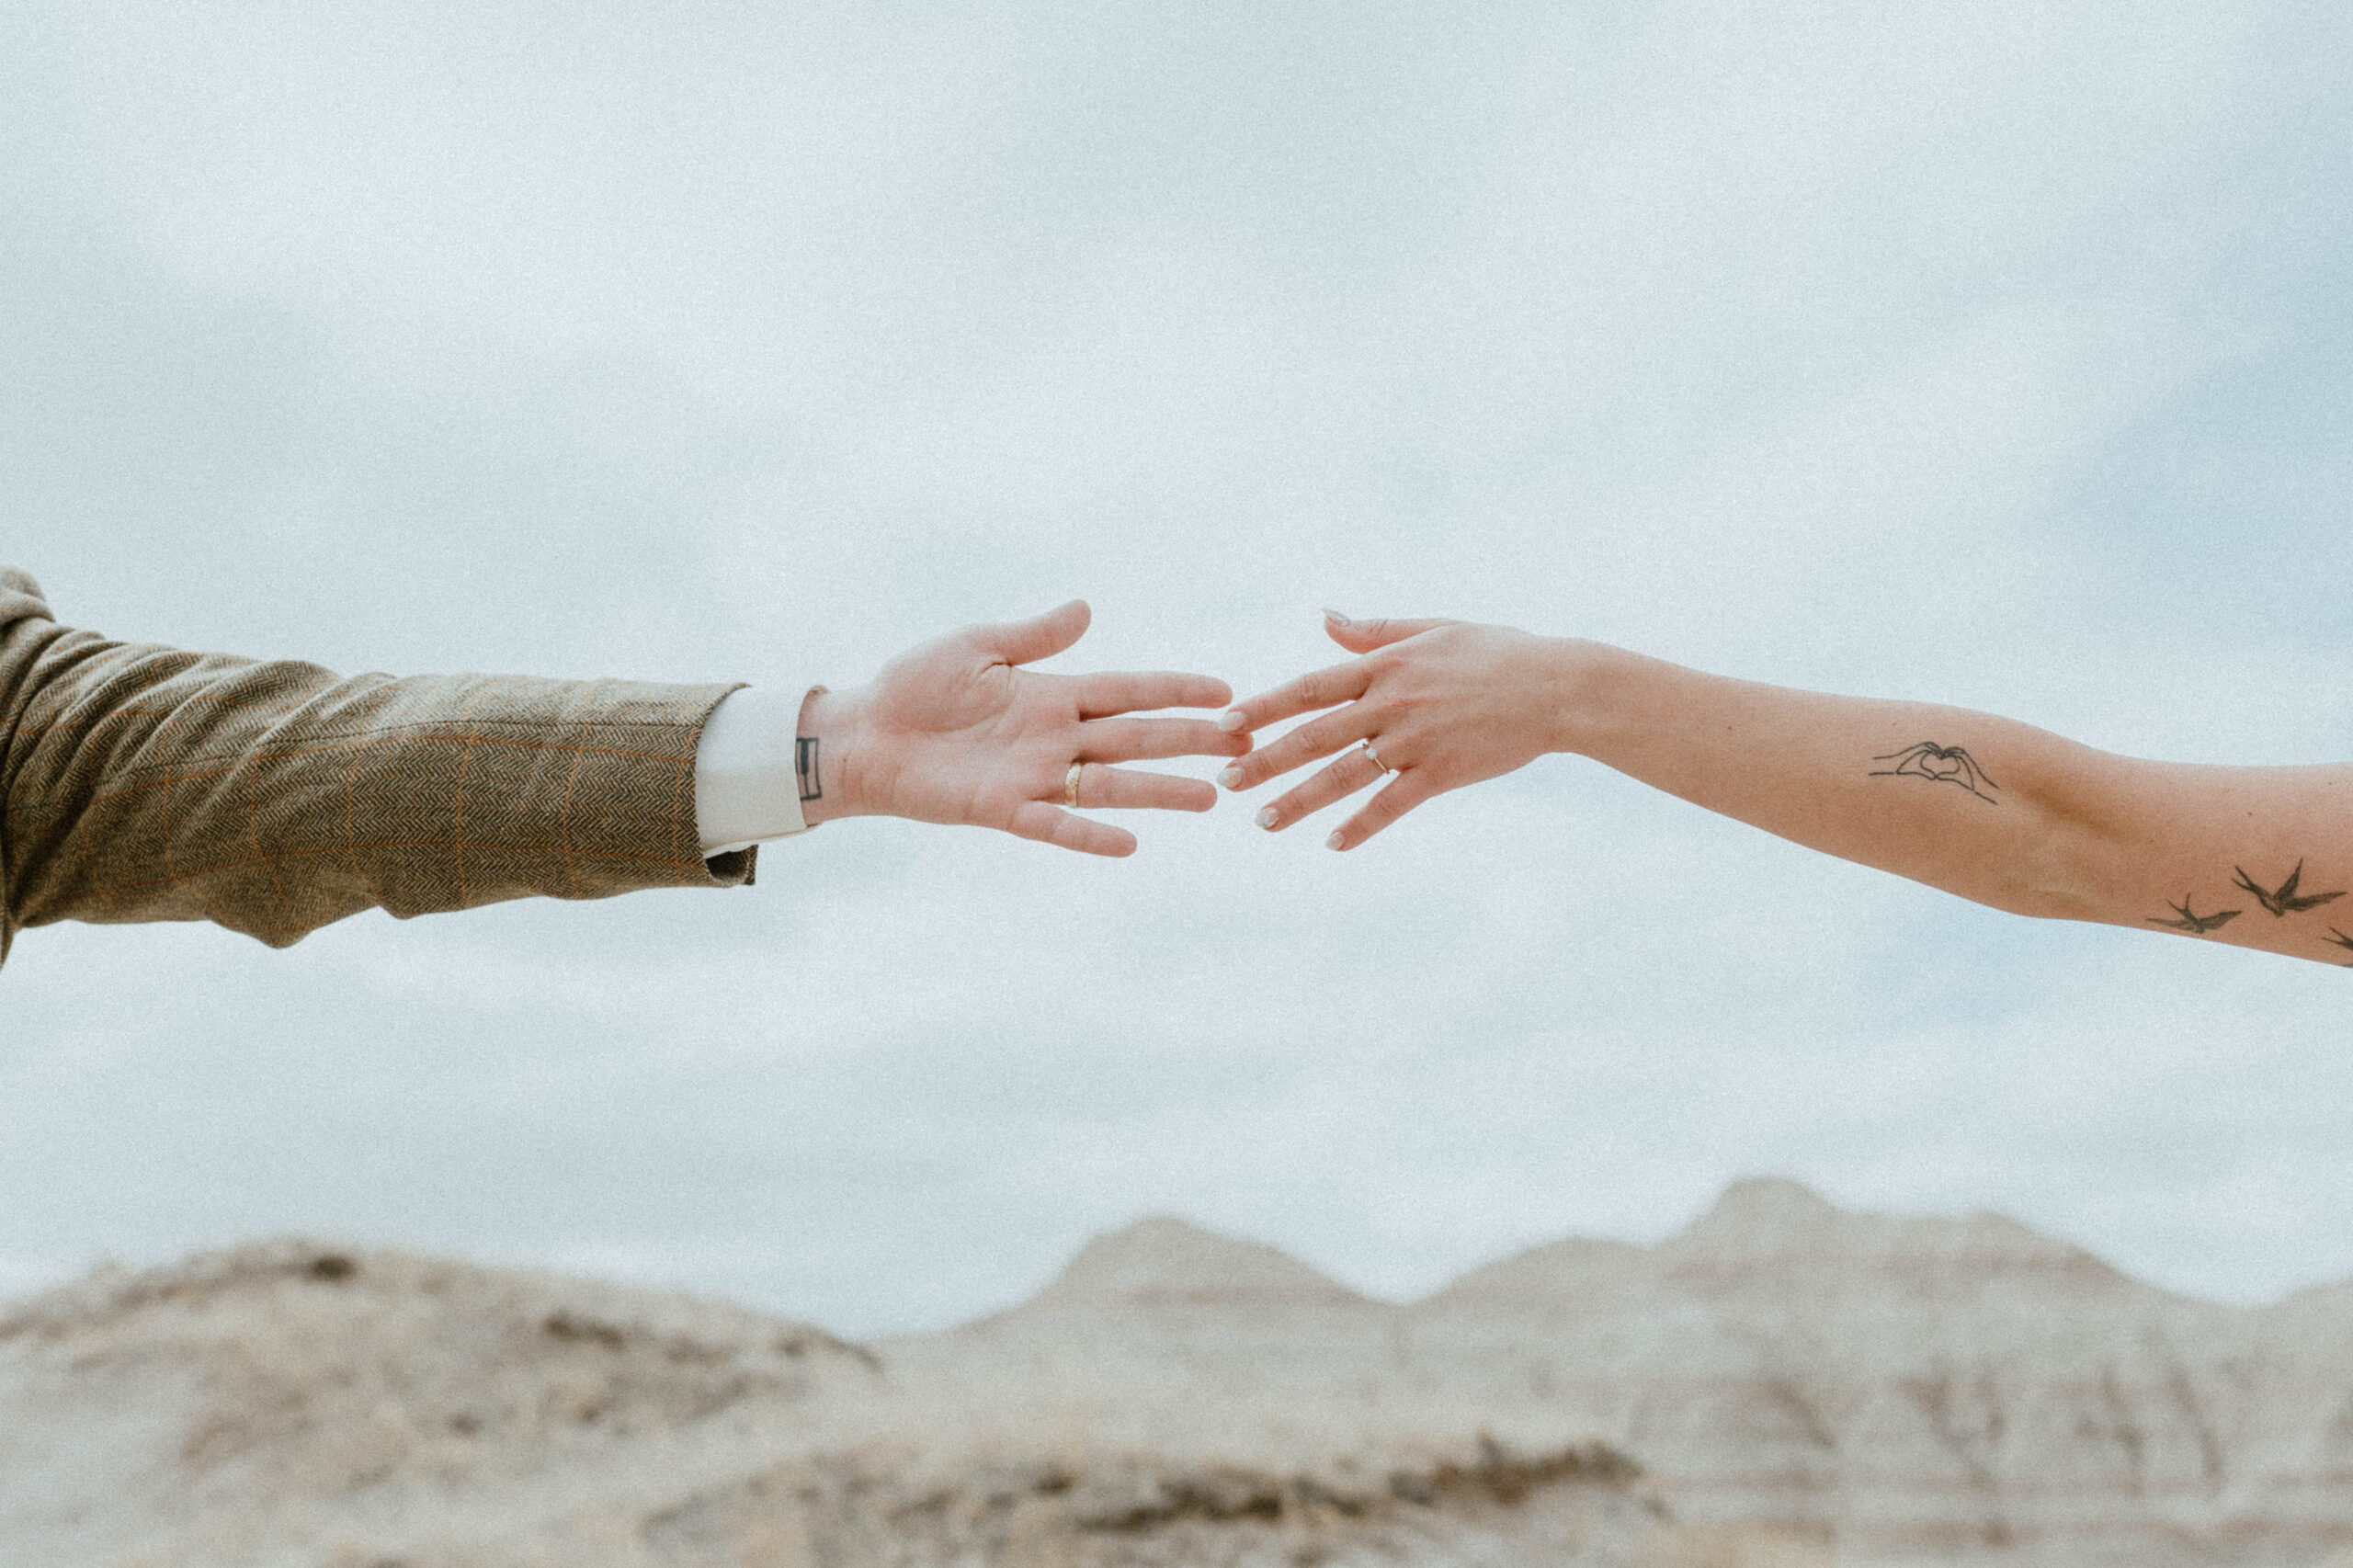 A bride and groom's hands are shown against a rugged landscape background in a national park elopement